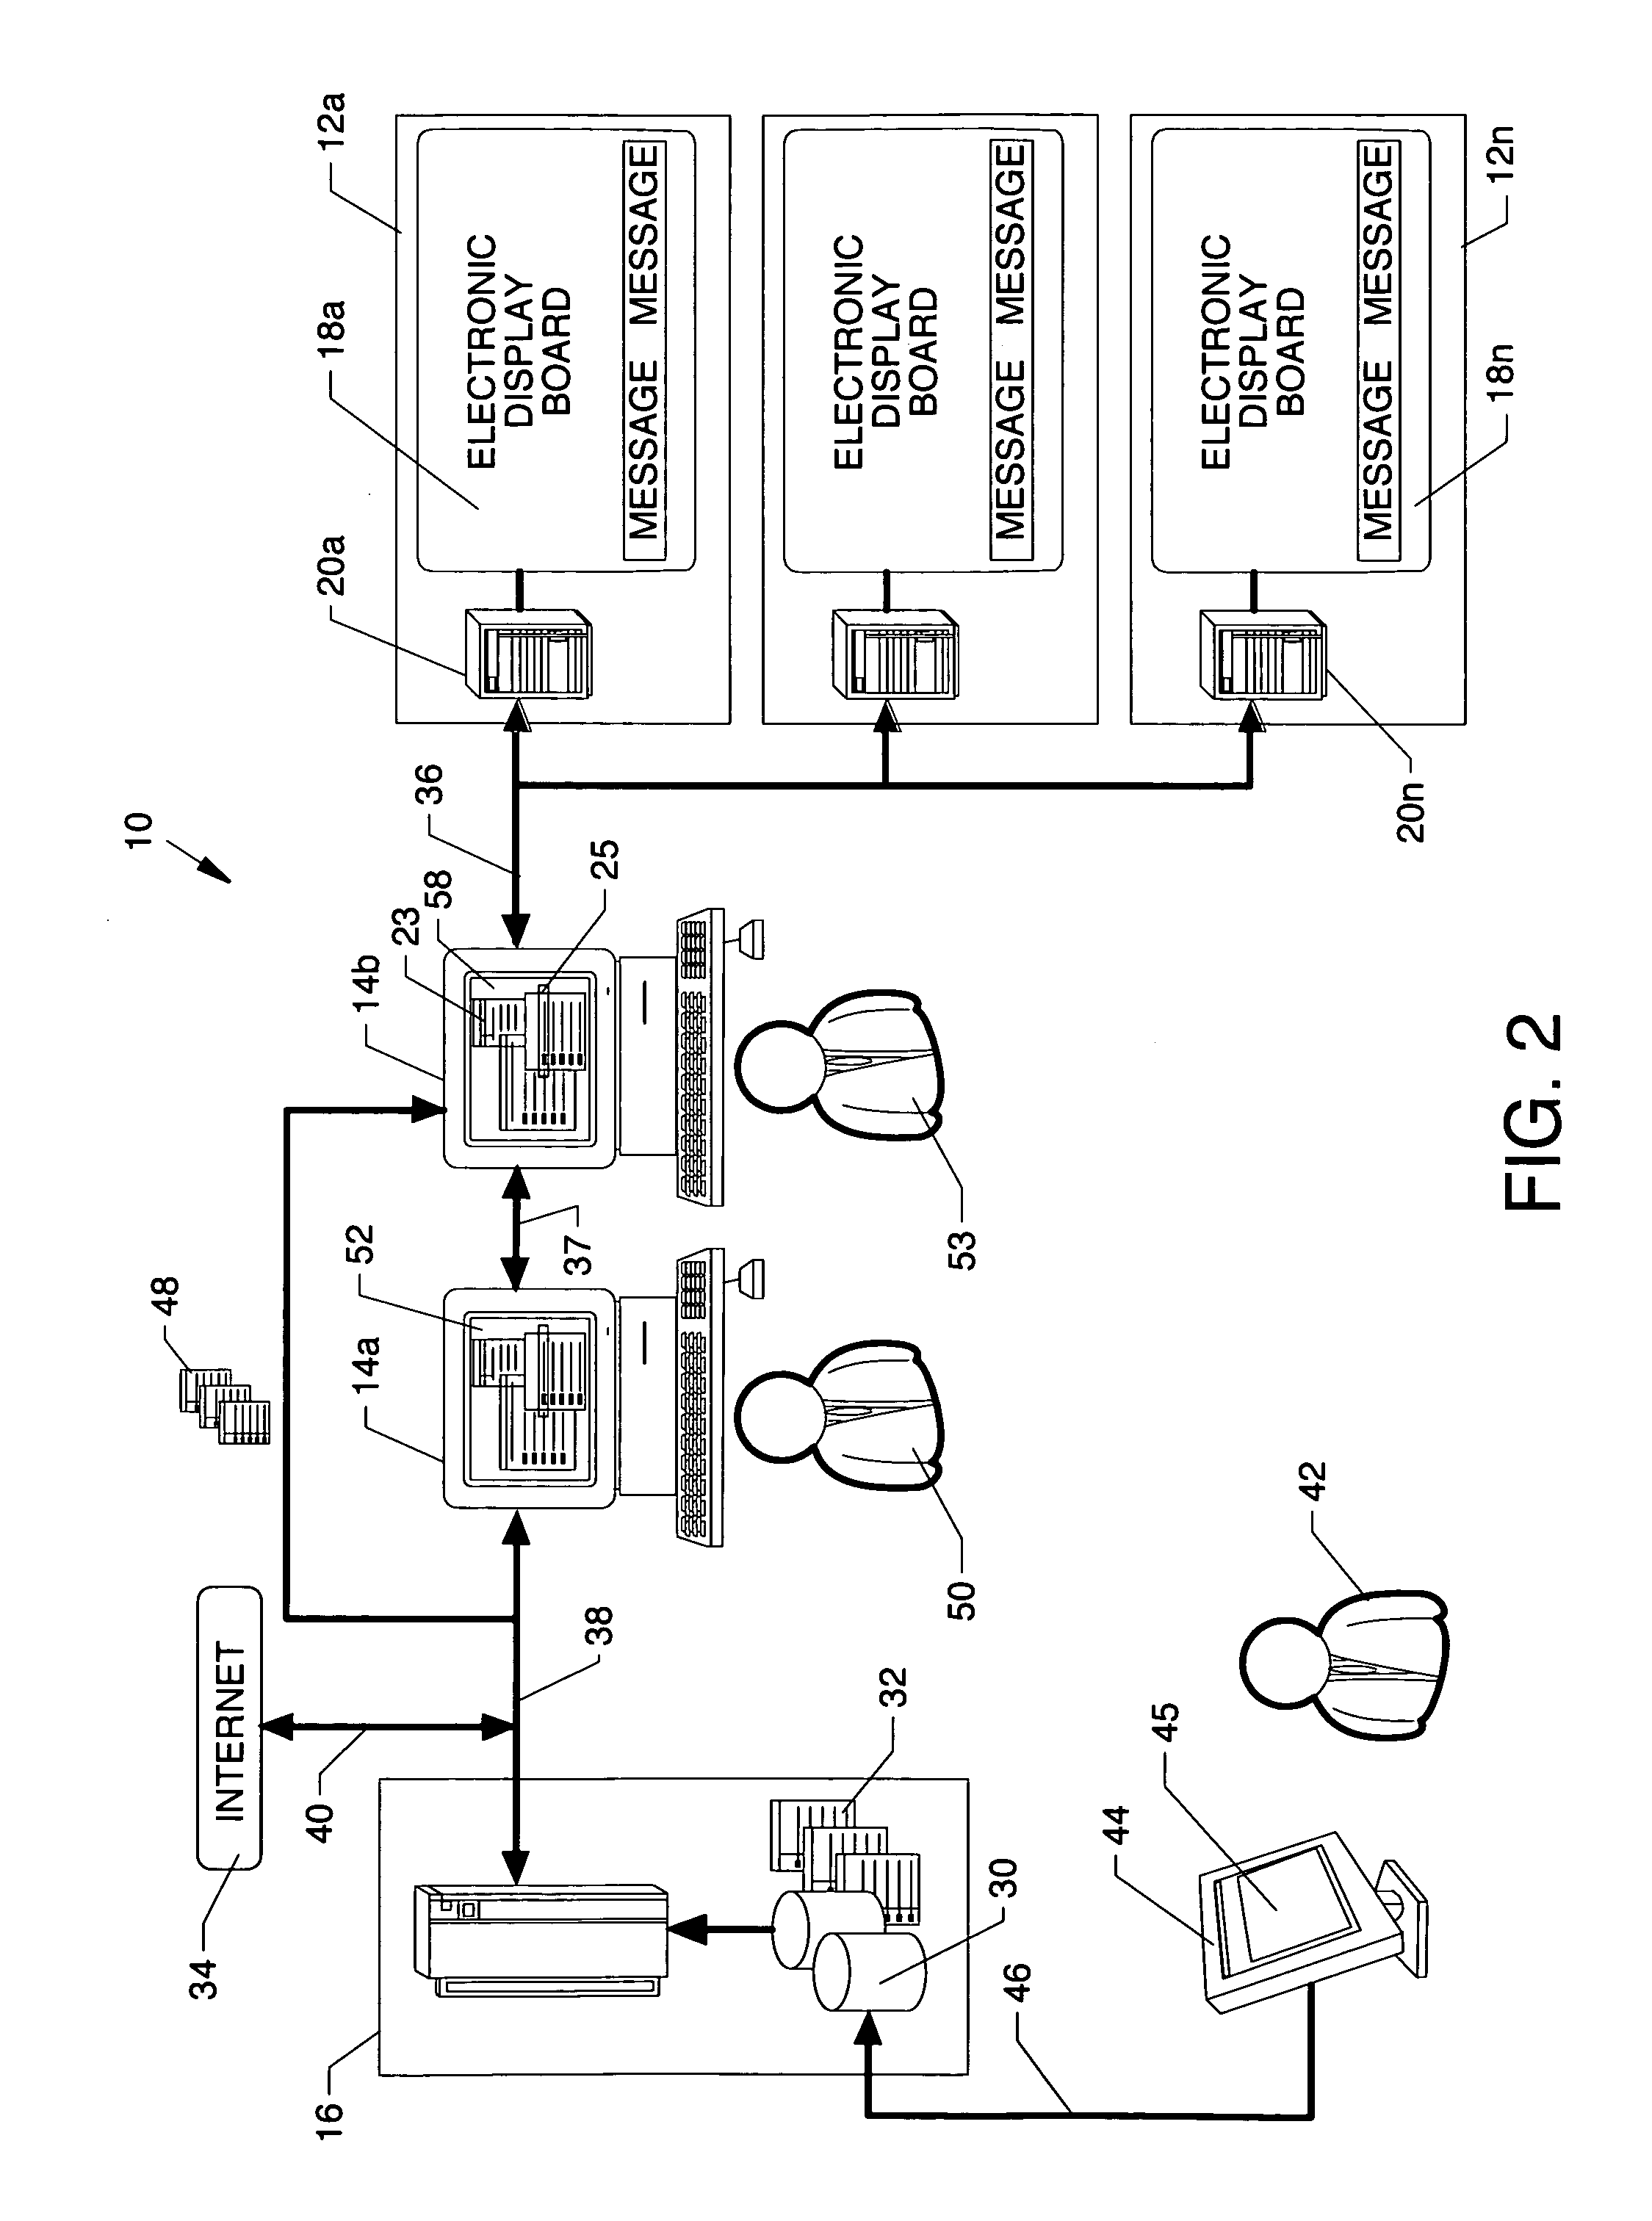 Intelligent interface display system relating real-time data with compiled data